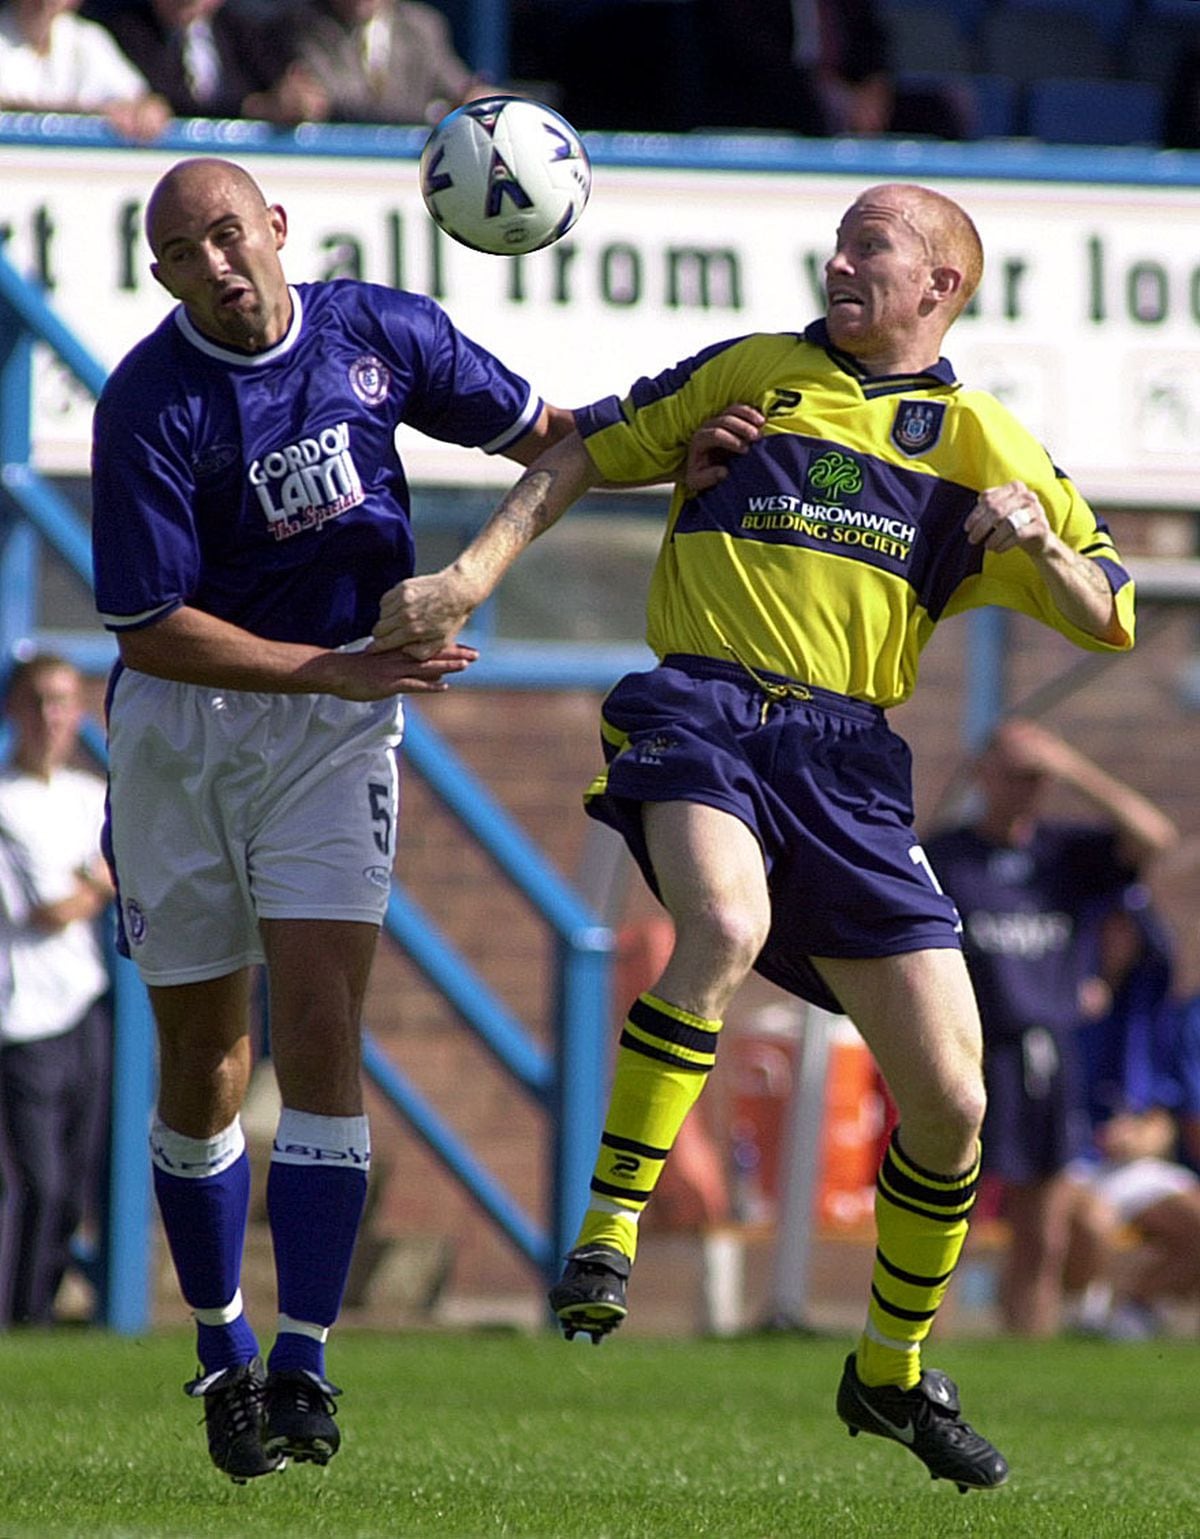 Albion's Lee Hughes challenges for the ball against Chesterfield's Steve Blatherwick at Saltergate. Copyright Express & Star: Paul Turner: 5/8/00: